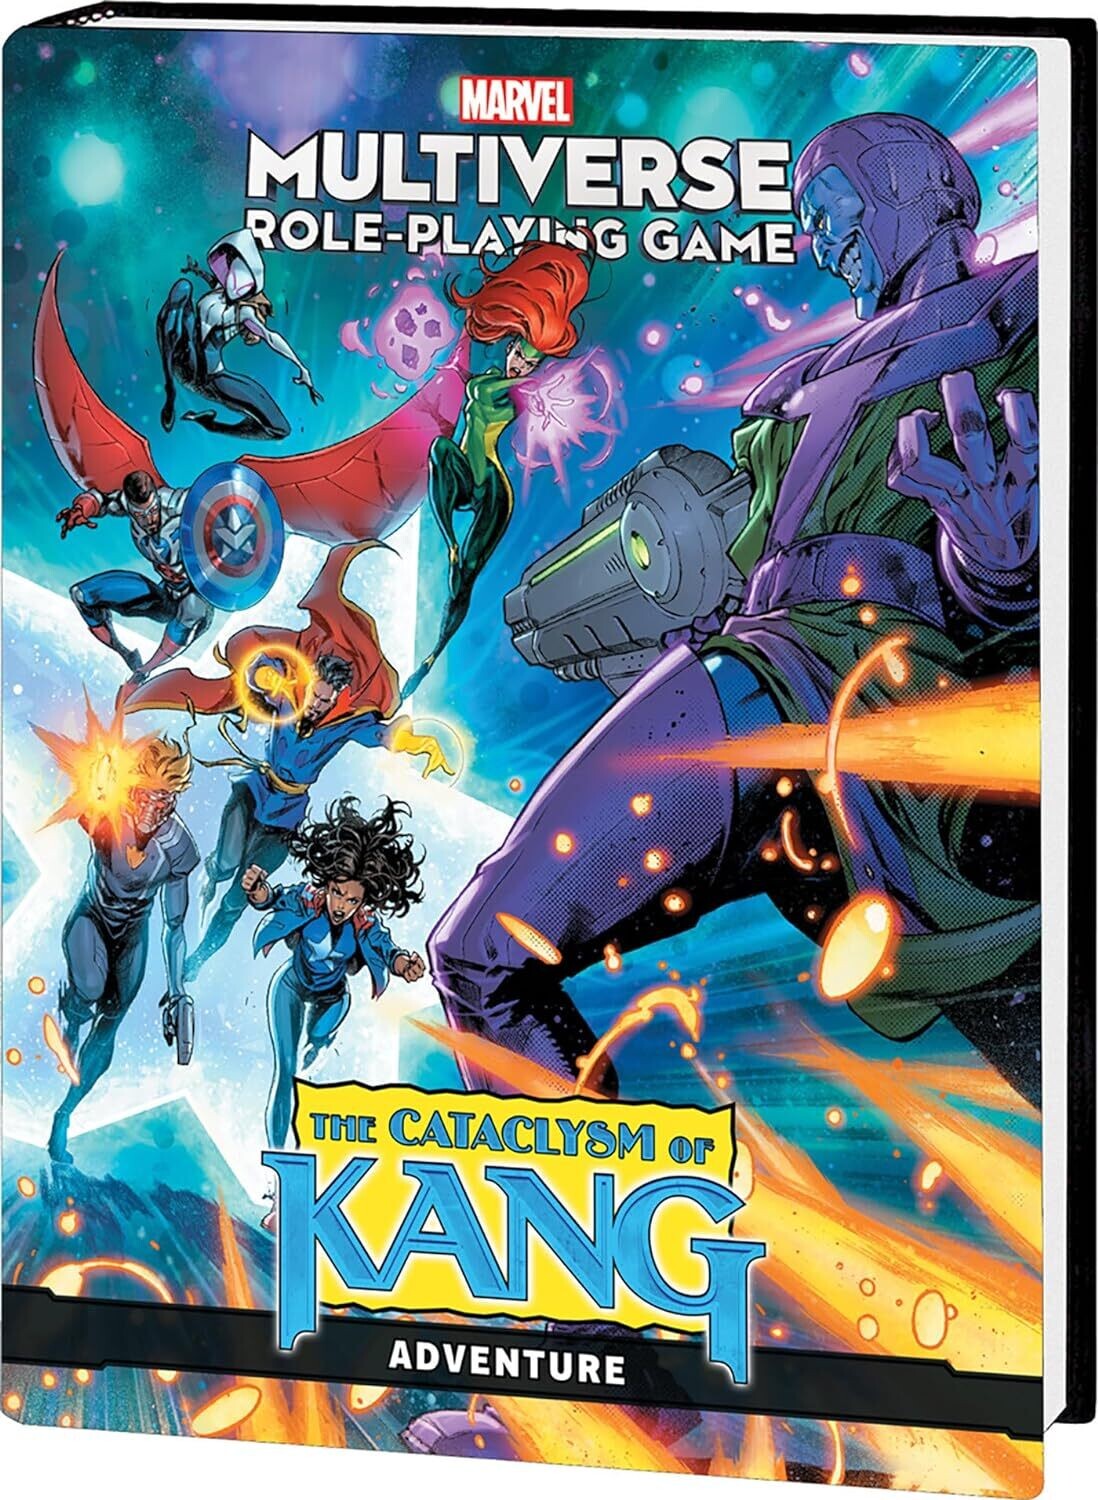 Marvel Multiverse Role-Playing Game "The Cataclysm Of Kang" Adventure